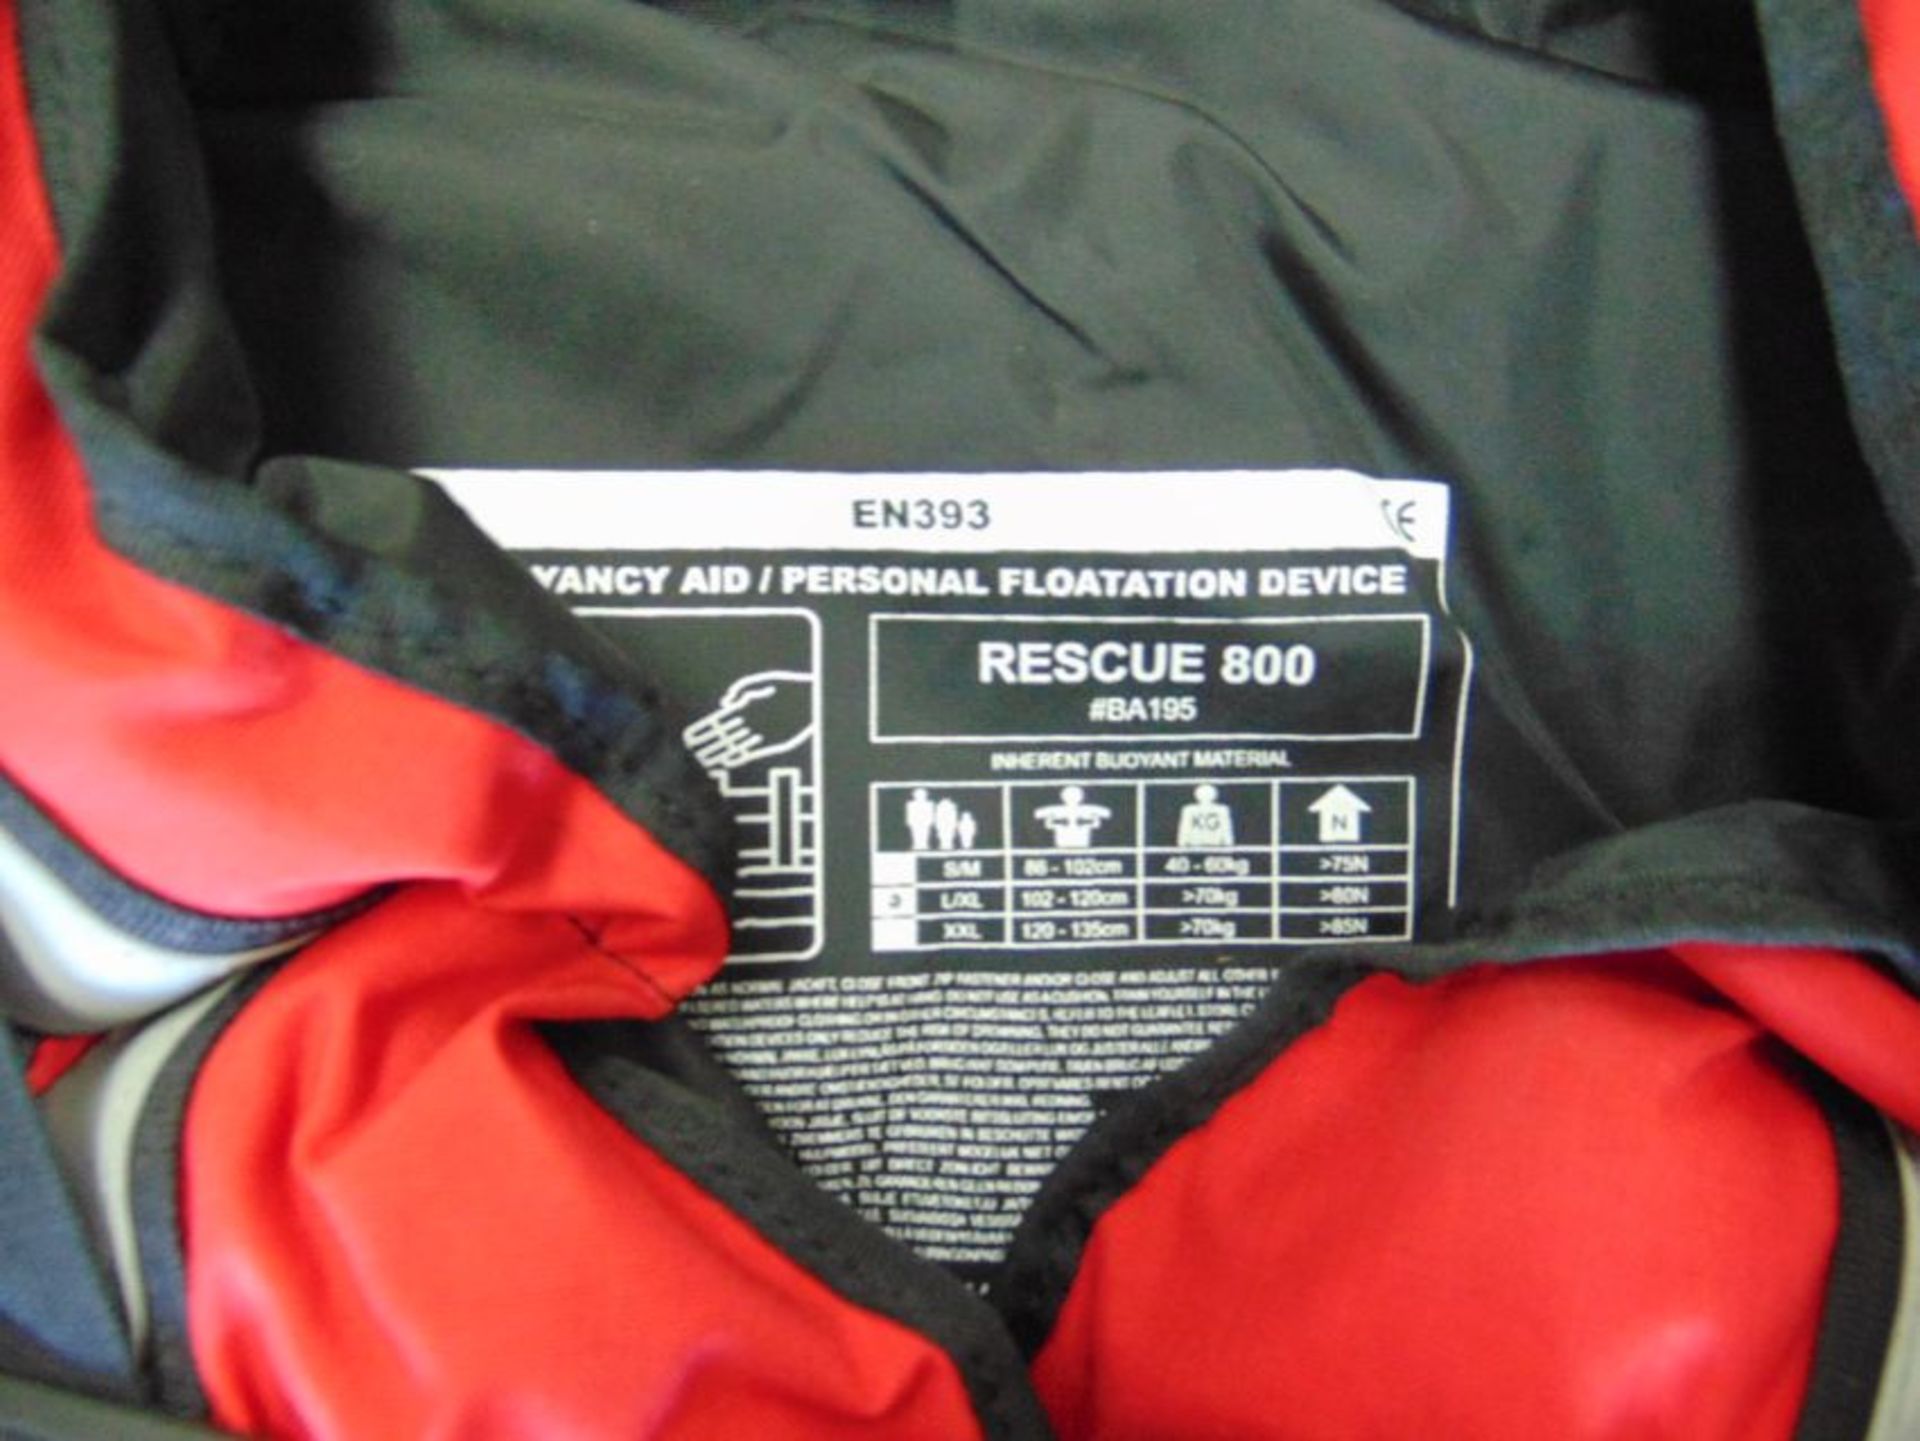 Palm Professional Rescue 800 Buoyancy Aid - PFD Personal Floatation Device Size L/XL - Image 3 of 4